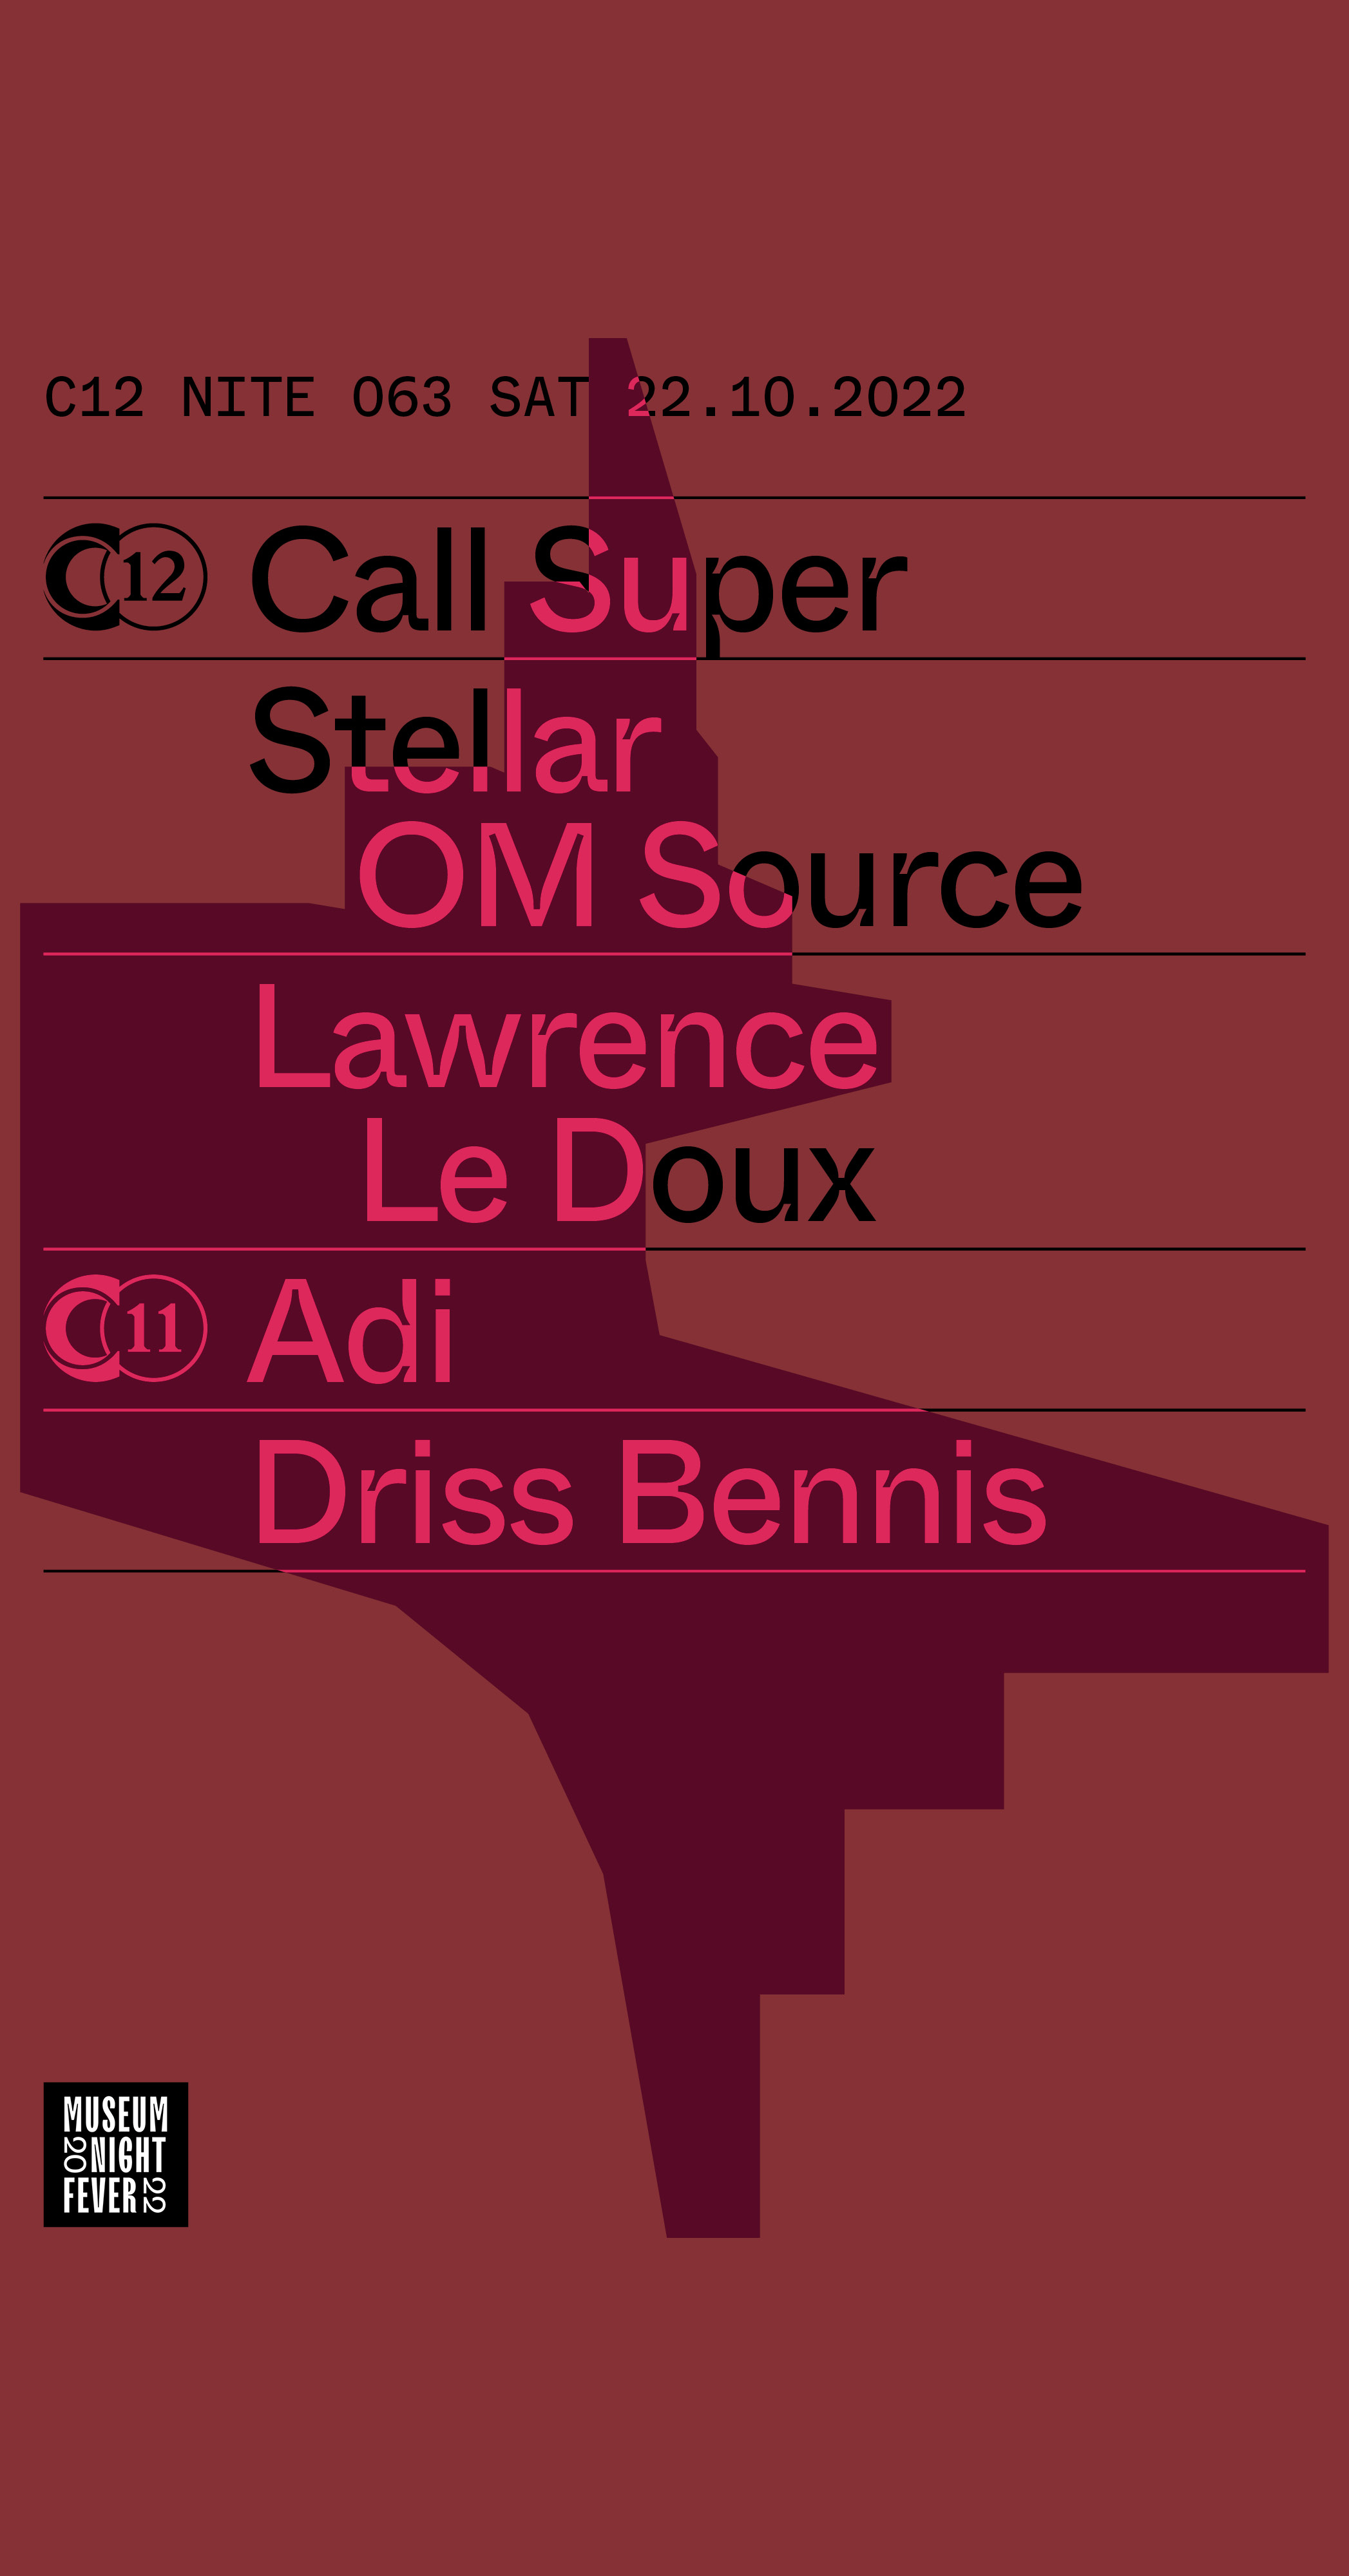 Call Super + Stellar OM Source + Lawrence Le Doux + Adi + Driss Bennis - Flyer front